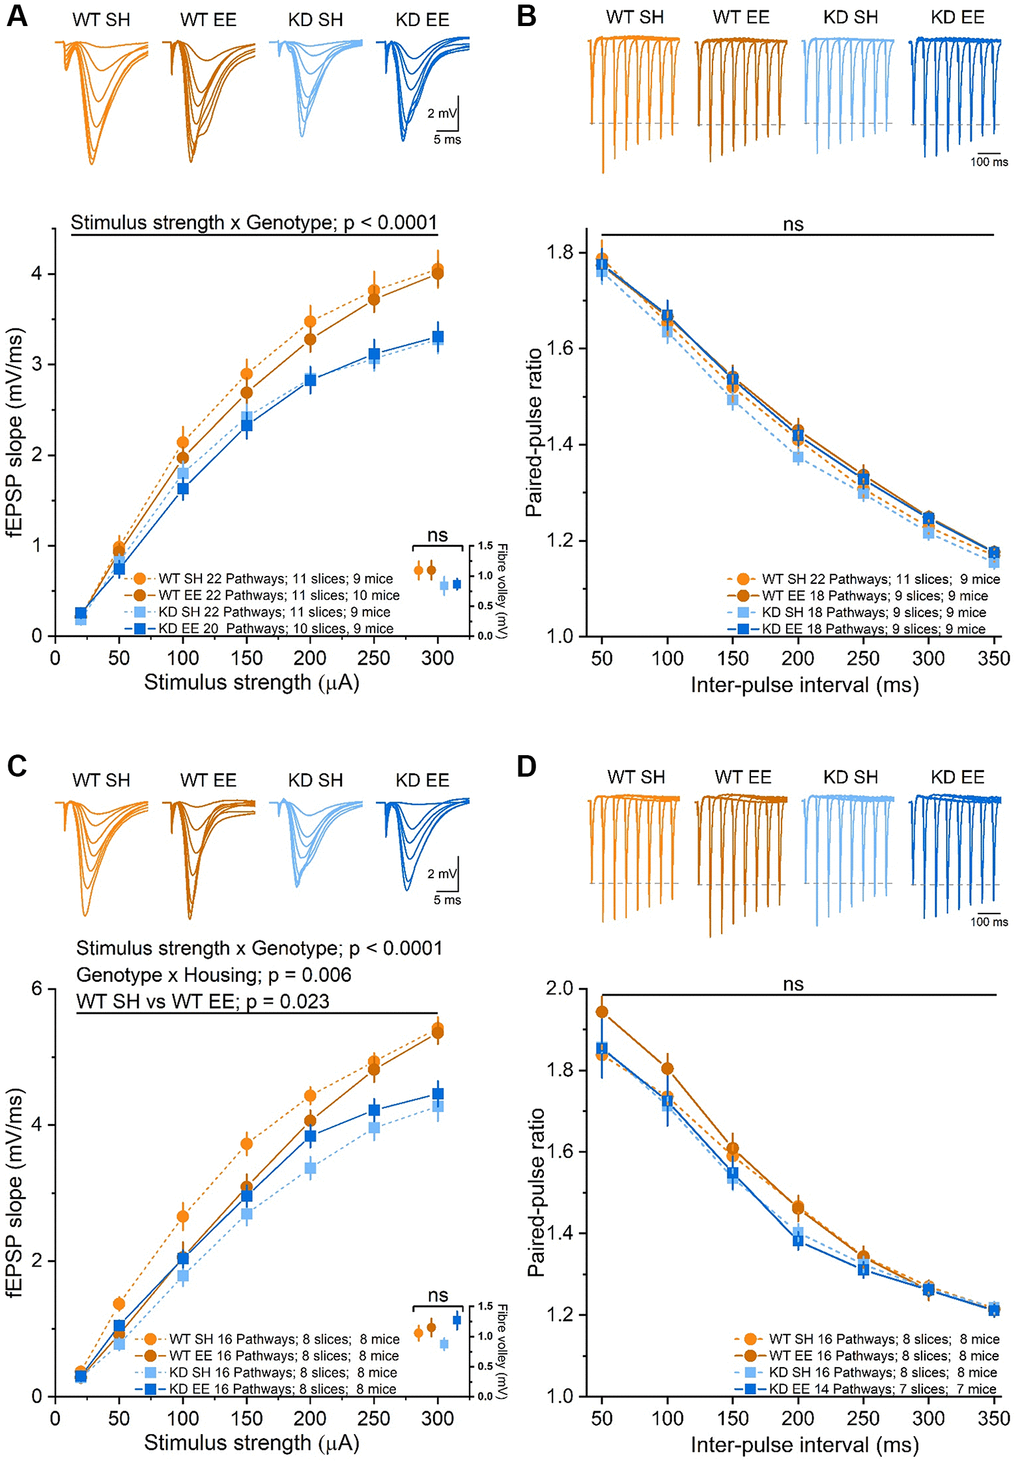 Basal synaptic transmission of stratum radiatum in area CA1 is affected in an experience- and MSK1-dependent manner. (A) The RM-ANOVA on the fEPSP Input/Output profile in the Adult groups with a within-factor as stimulus strength (20 to 300 μA) gave a significant effect (F(6,492) = 958.85, p p p = 0.001), but no significant interaction Genotype x Housing nor Housing alone. A comparison of the fibre volley amplitude across a subset of experiments (10–12 pathways from 7–9 slices and from 7–9 mice) where the fiber volley was measurable at 300 μA (inset, bottom right, data points offset for clarity) showed no significant (ns) effect of Genotype, Housing, or Genotype x Housing across groups. (B) The RM-ANOVA on the paired-pulse facilitation in the Adult groups with inter-pulse interval (50–350 ms) as a within-factor variable gave only a significant effect of interval (F(6,432) = 1229.1, p C) In the Aged groups there was a significant effect of stimulus strength (F(6,360) = 787.75, p p p p = 0.006). The simple main effect analysis revealed a significant difference between standard-housed and enriched WT mice (F(1,60) = 5.44, p = 0.023) and between standard-housed WT and MSK1 KD mice (F(1,60) = 33.51, p D) In the analysis of the paired-pulse facilitation data, there was only a significant effect of interval (F(6,348) = 614.28, p 